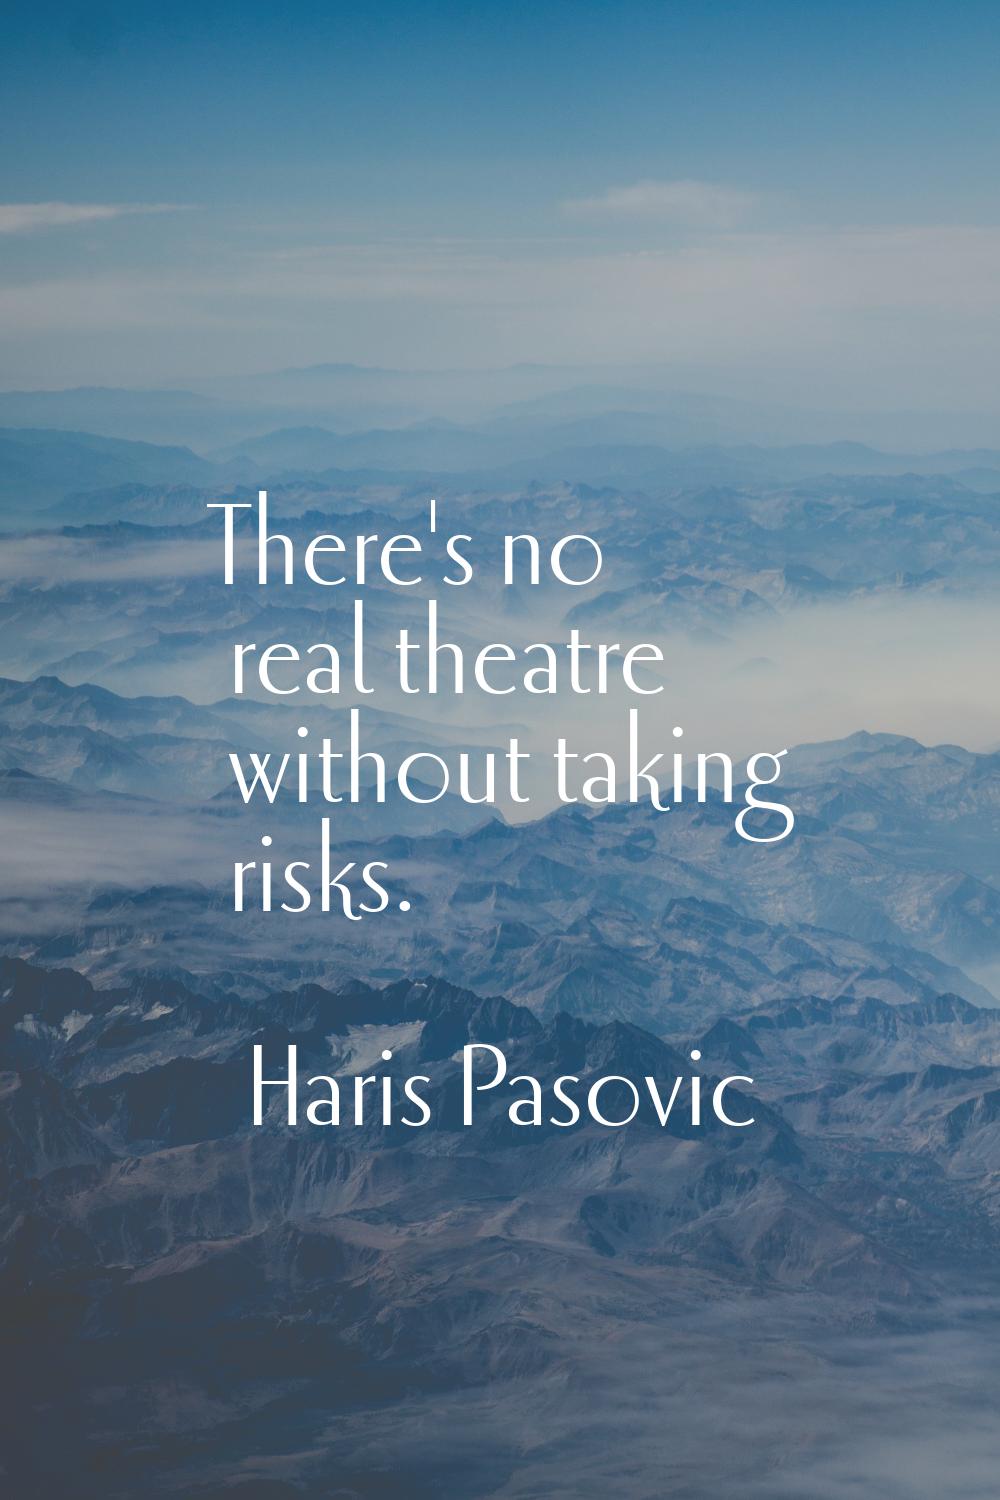 There's no real theatre without taking risks.